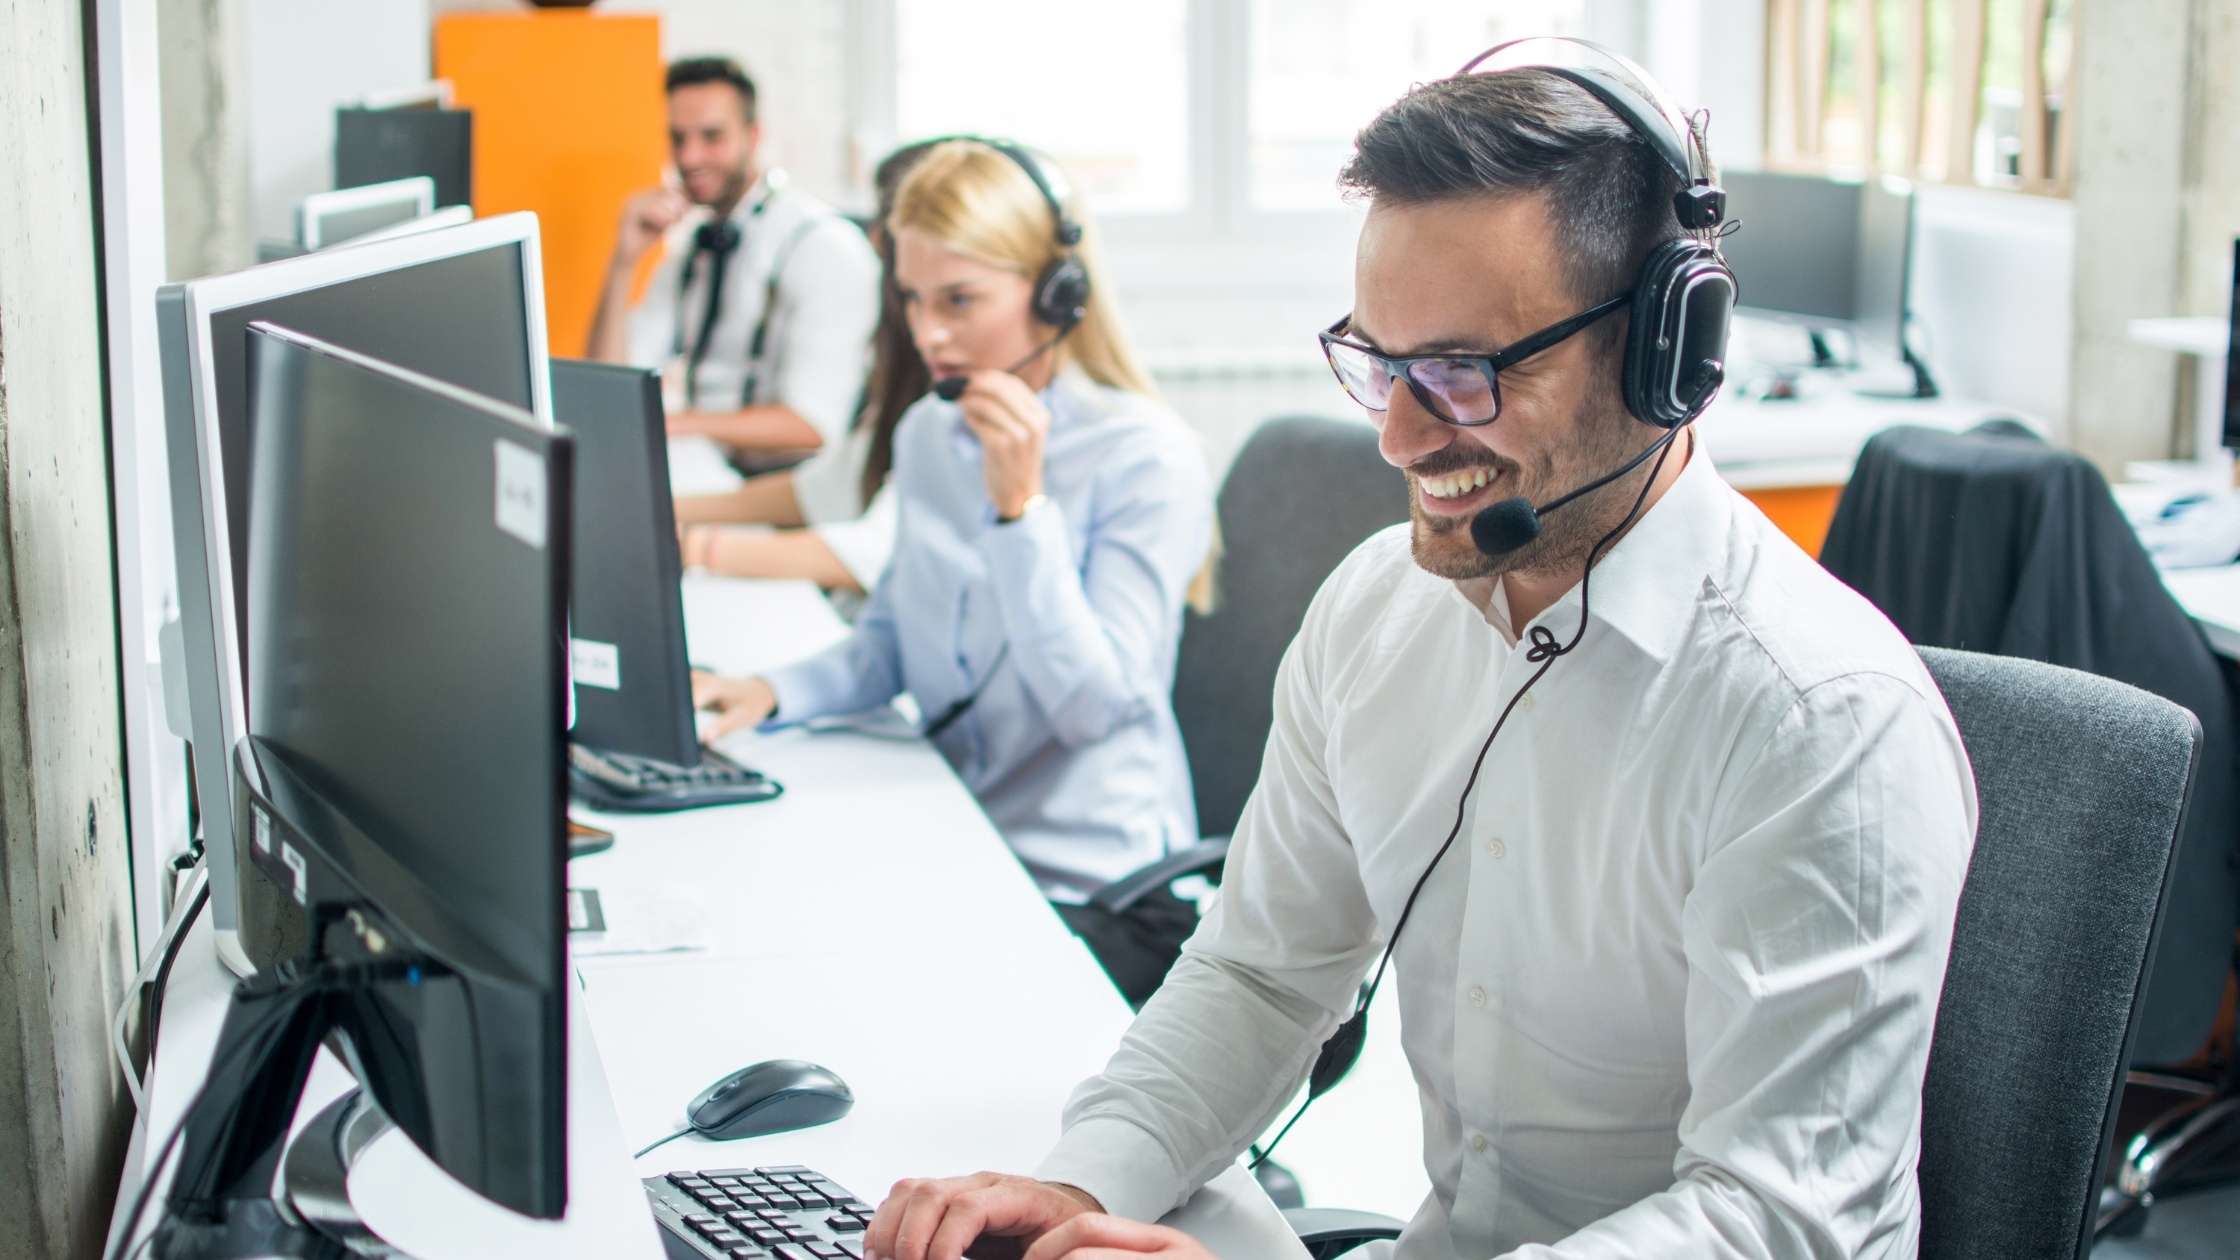 10 call center services you'll want for your business in 2023